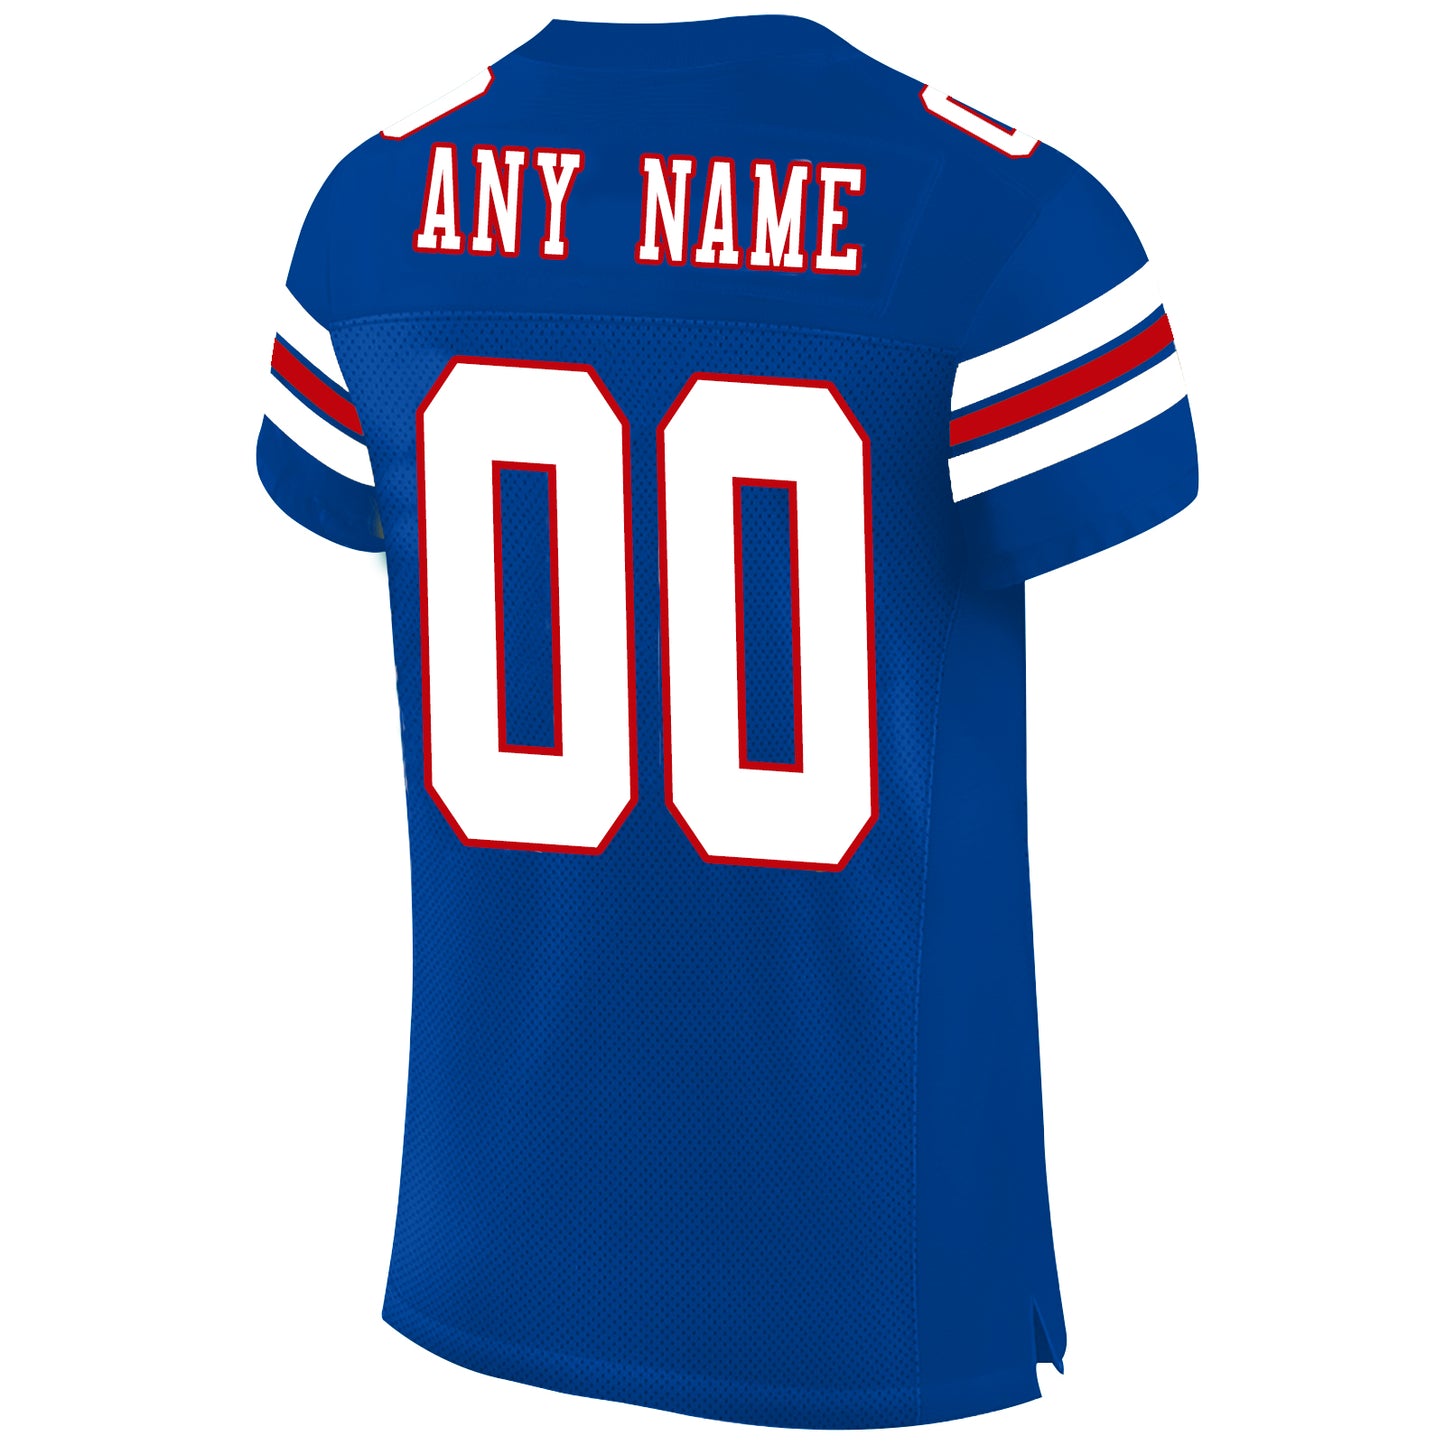 Custom Football Jersey for Men Women Youth Personalize Sports Shirt Design Buffalo Bills Royal Stitched Name And Number Christmas Birthday Gift